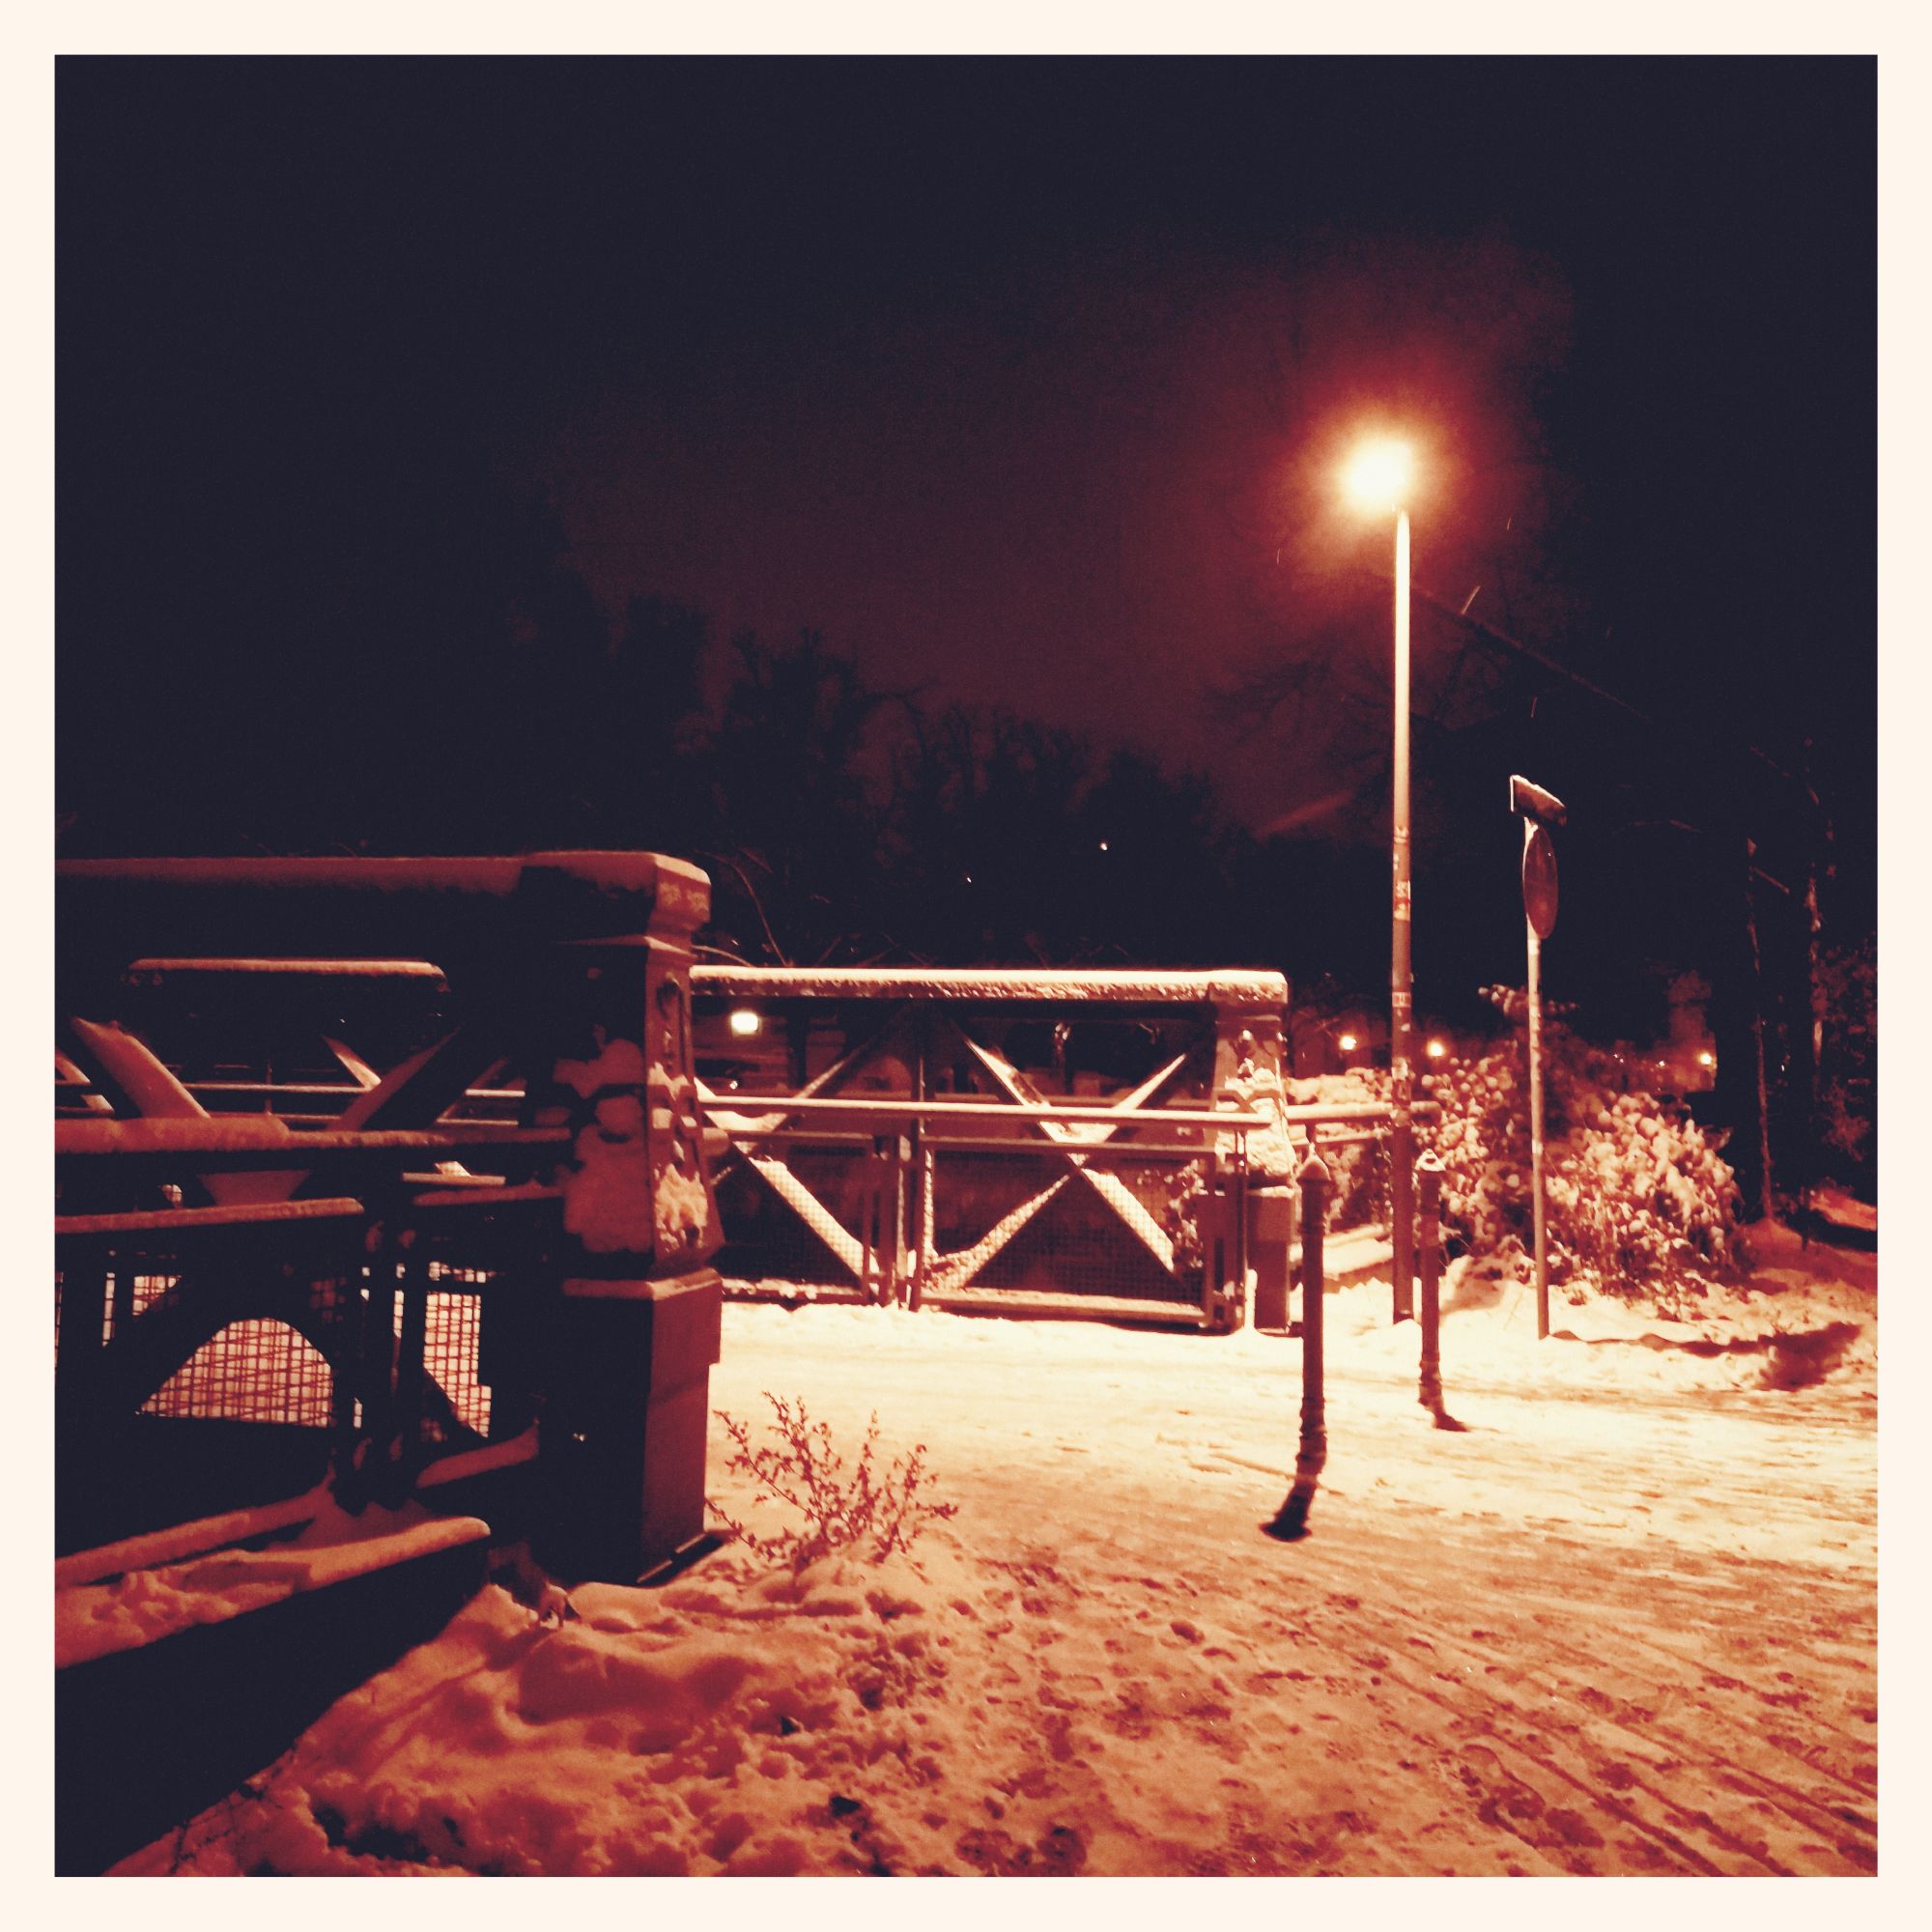 An iron bridge in snow, and a lantern shedding its light on it.